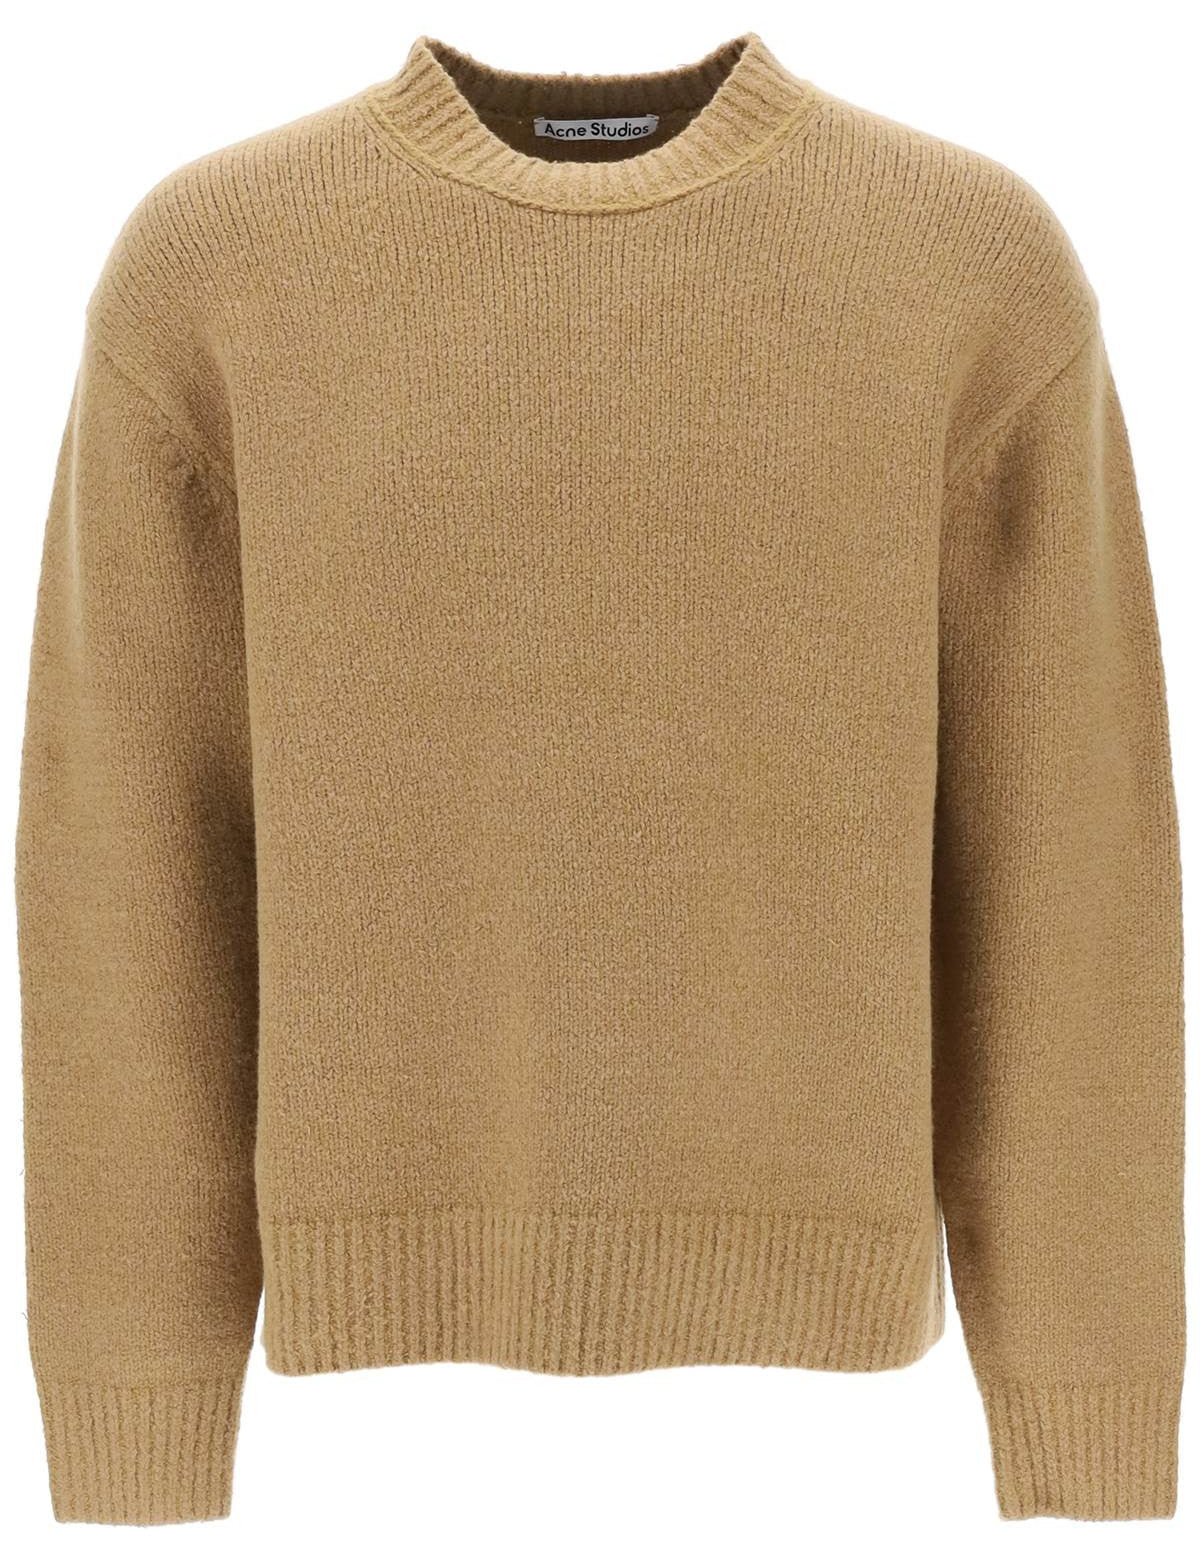 acne-studios-crew-neck-sweater-in-wool-and-cotton.jpg